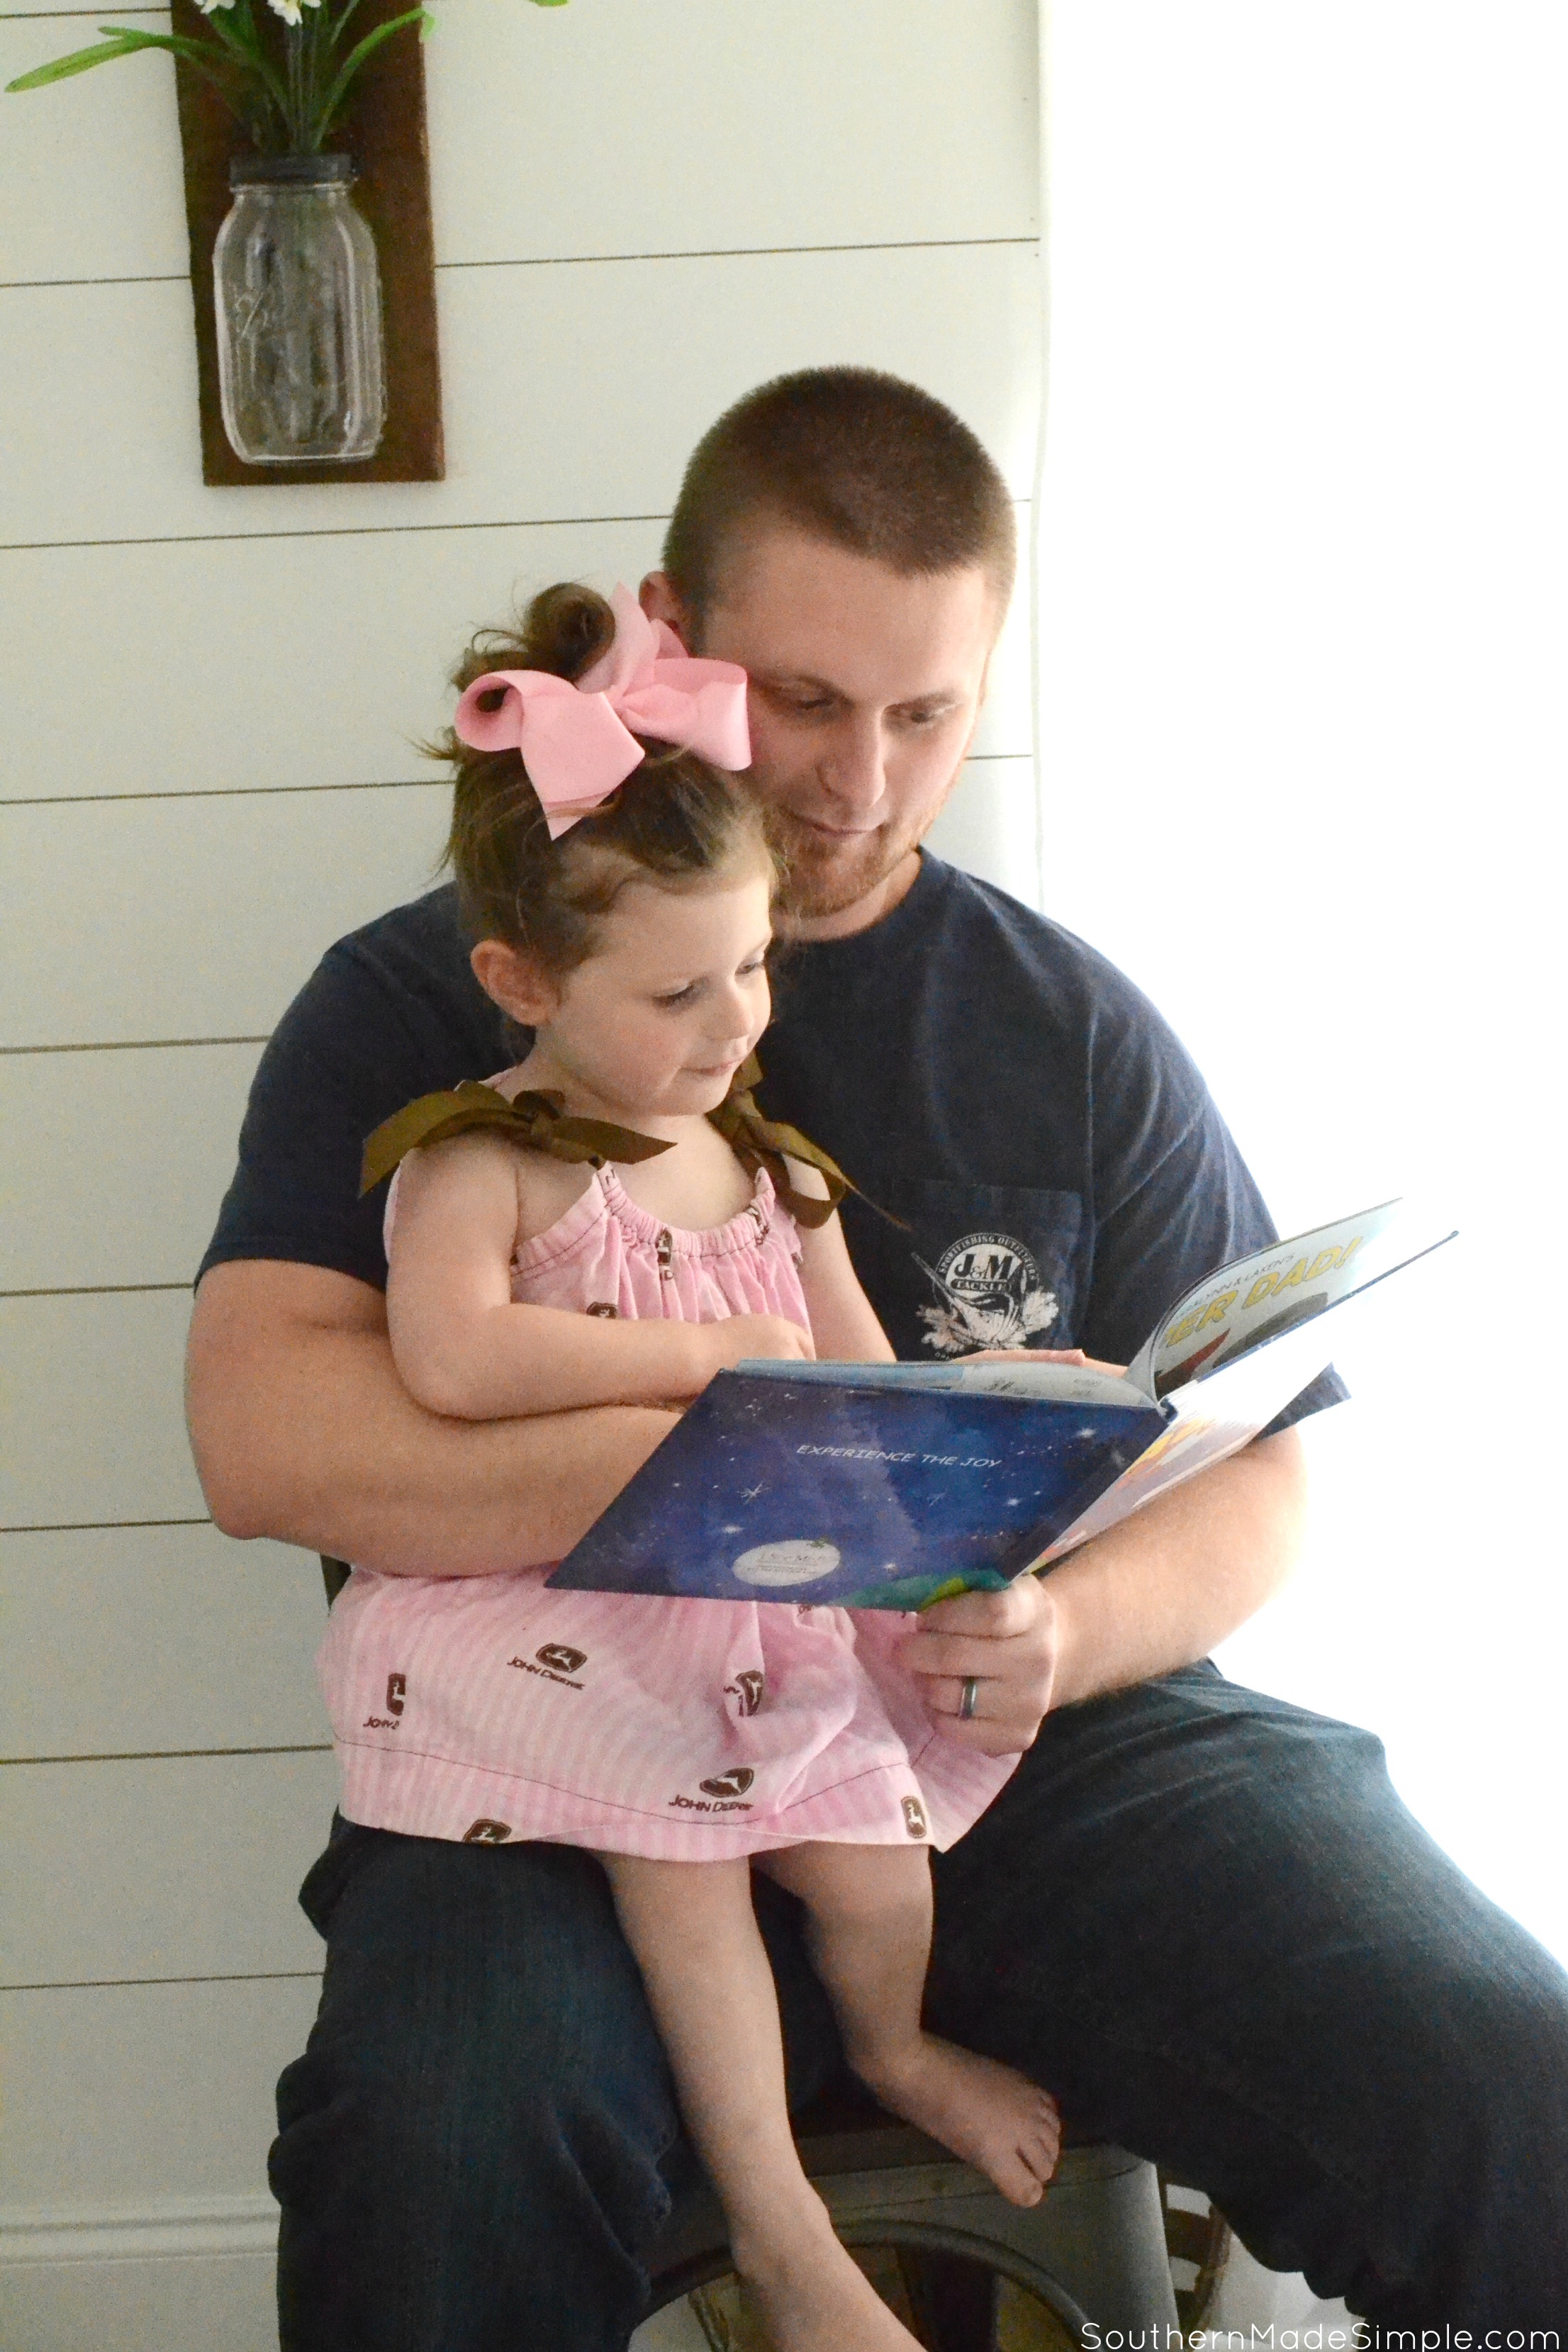 A Father's Day Gift We'll Always Cherish - Super Dad from I See Me! Personalized Children's Books